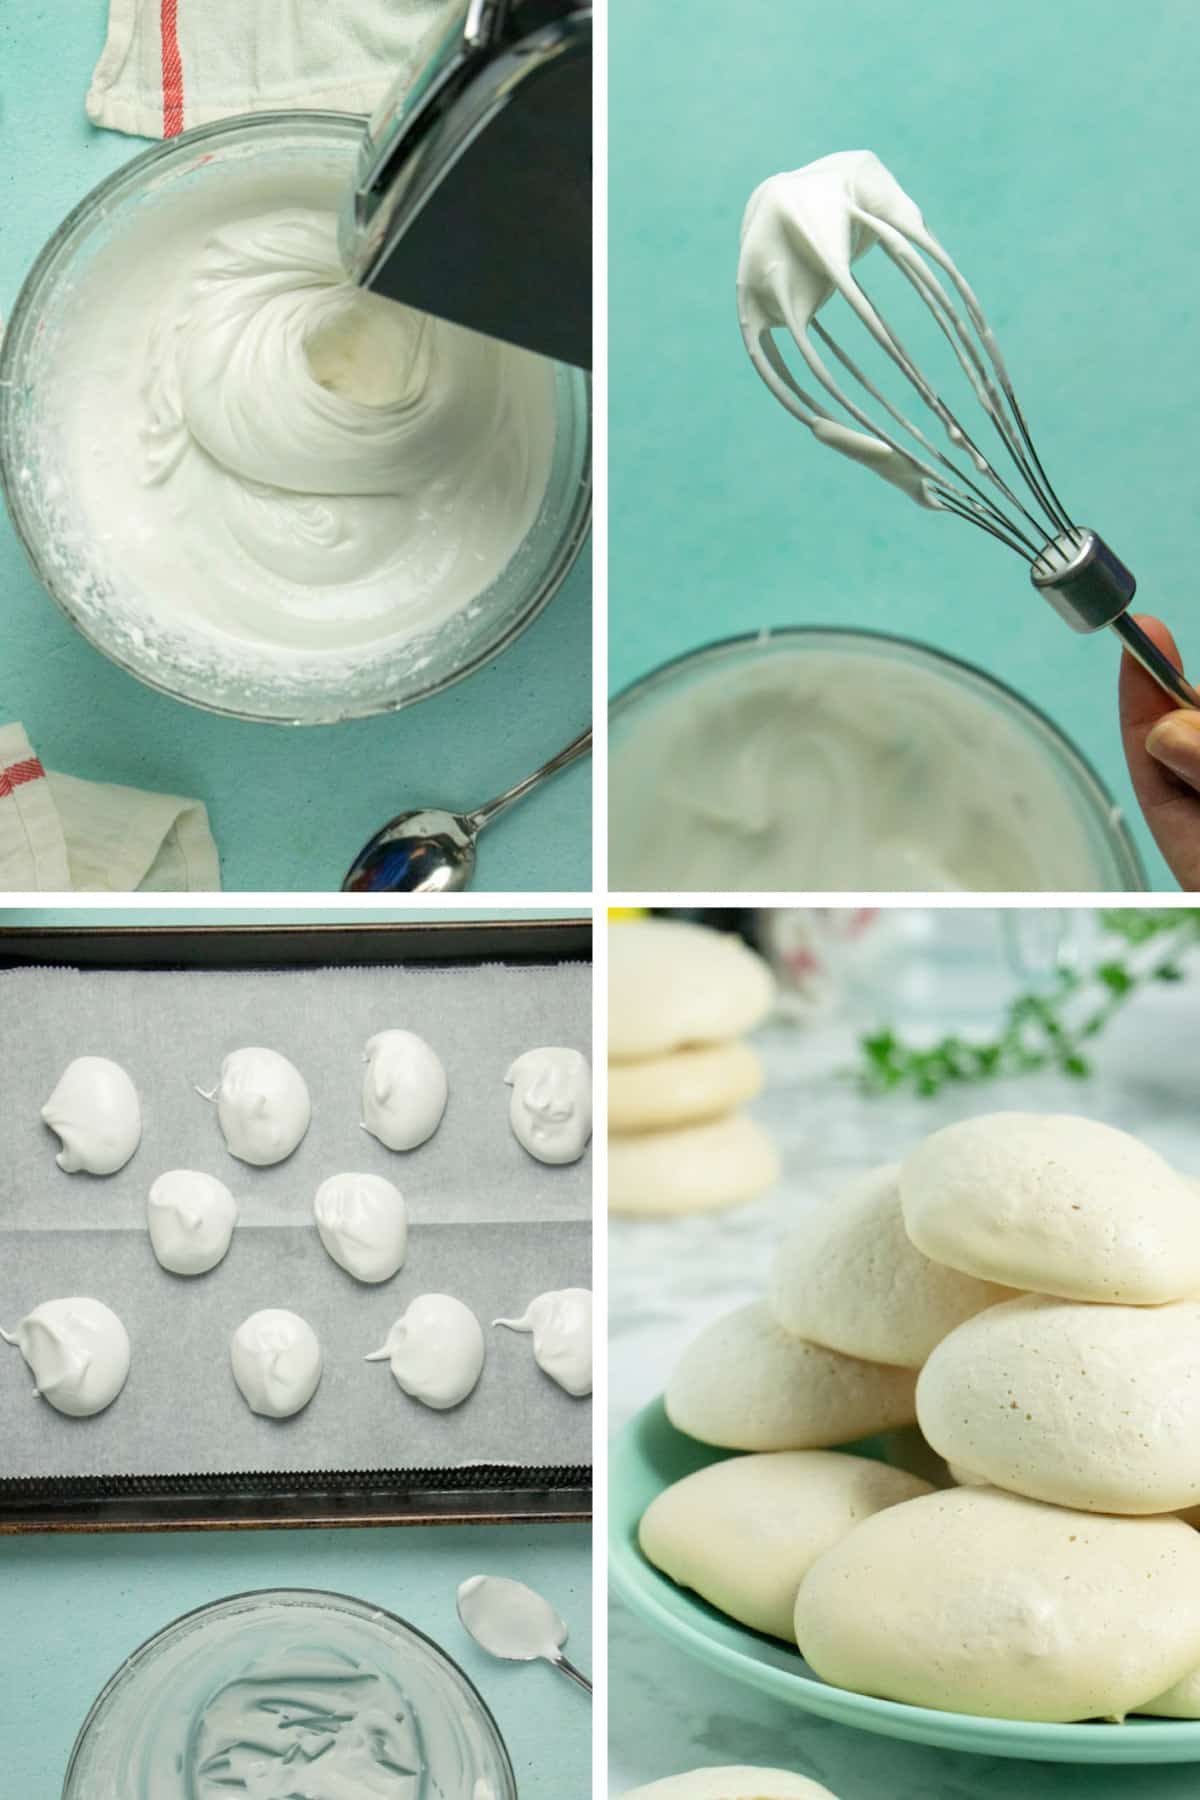 image collage of whipping aquafaba, soft peaks on a beater, uncooked meringues on a baking sheet, and baked meringues on a plate